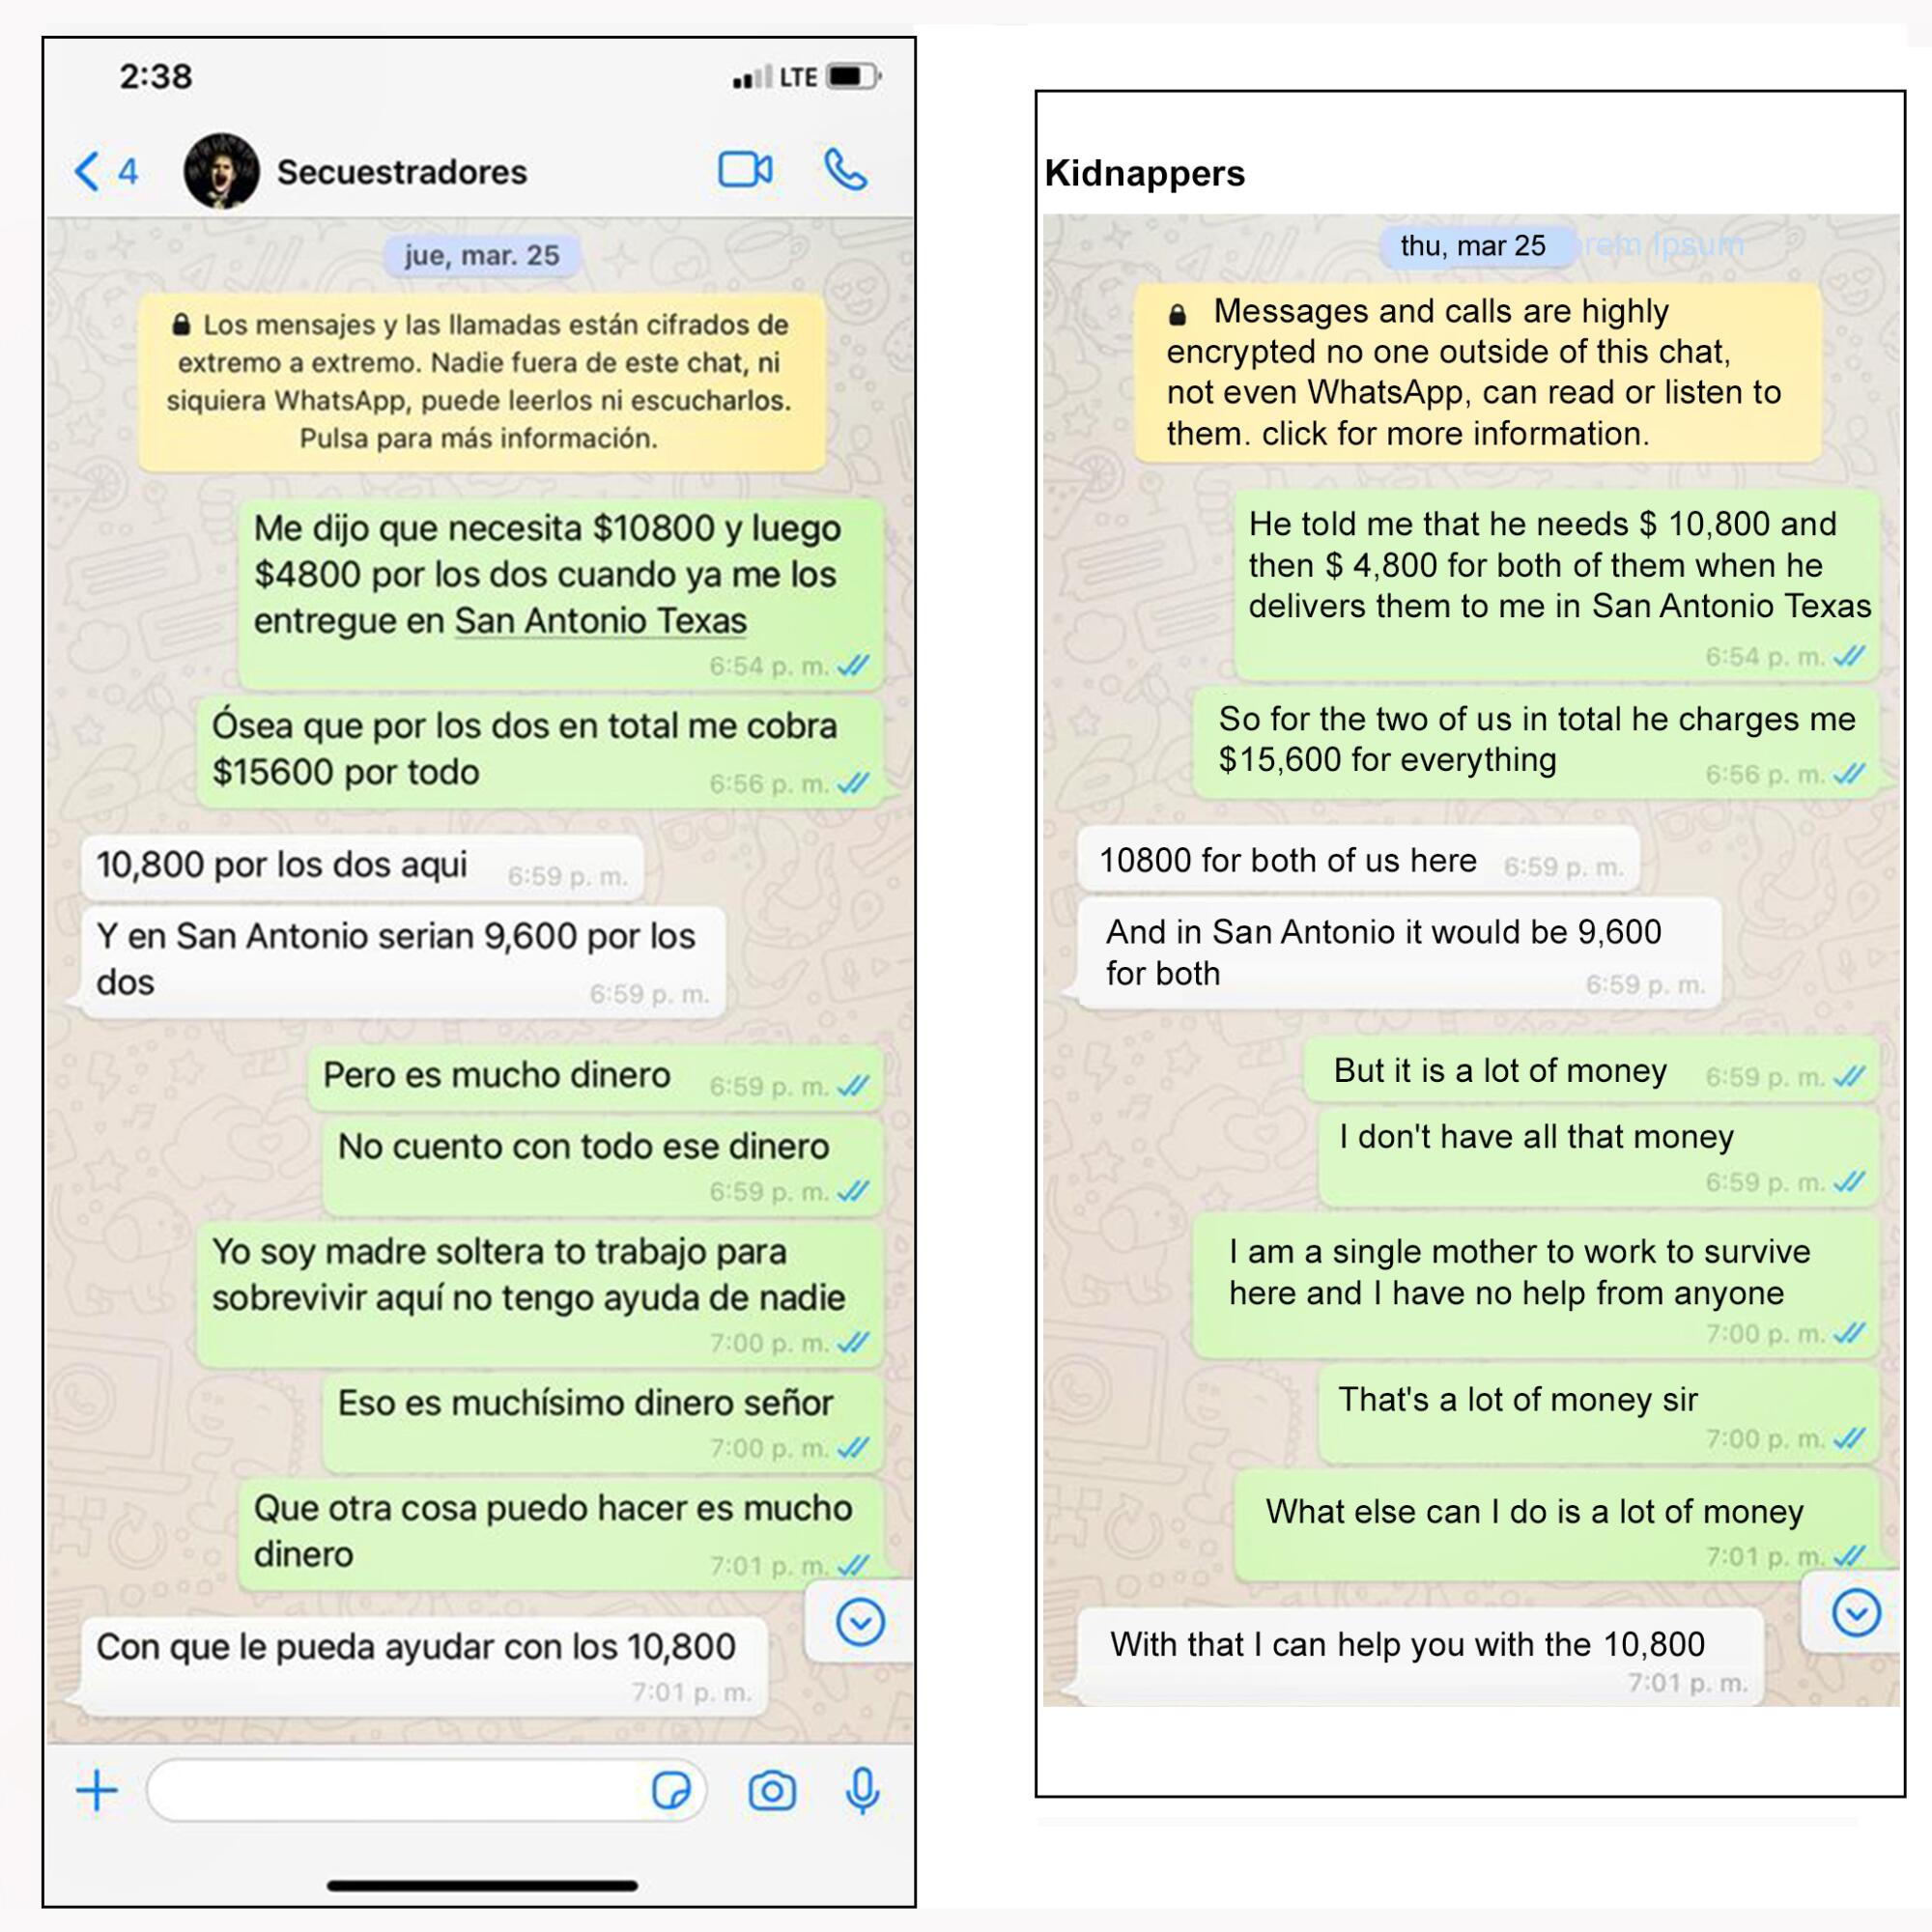 Two screens of text messages, in Spanish on the left and English on the right.